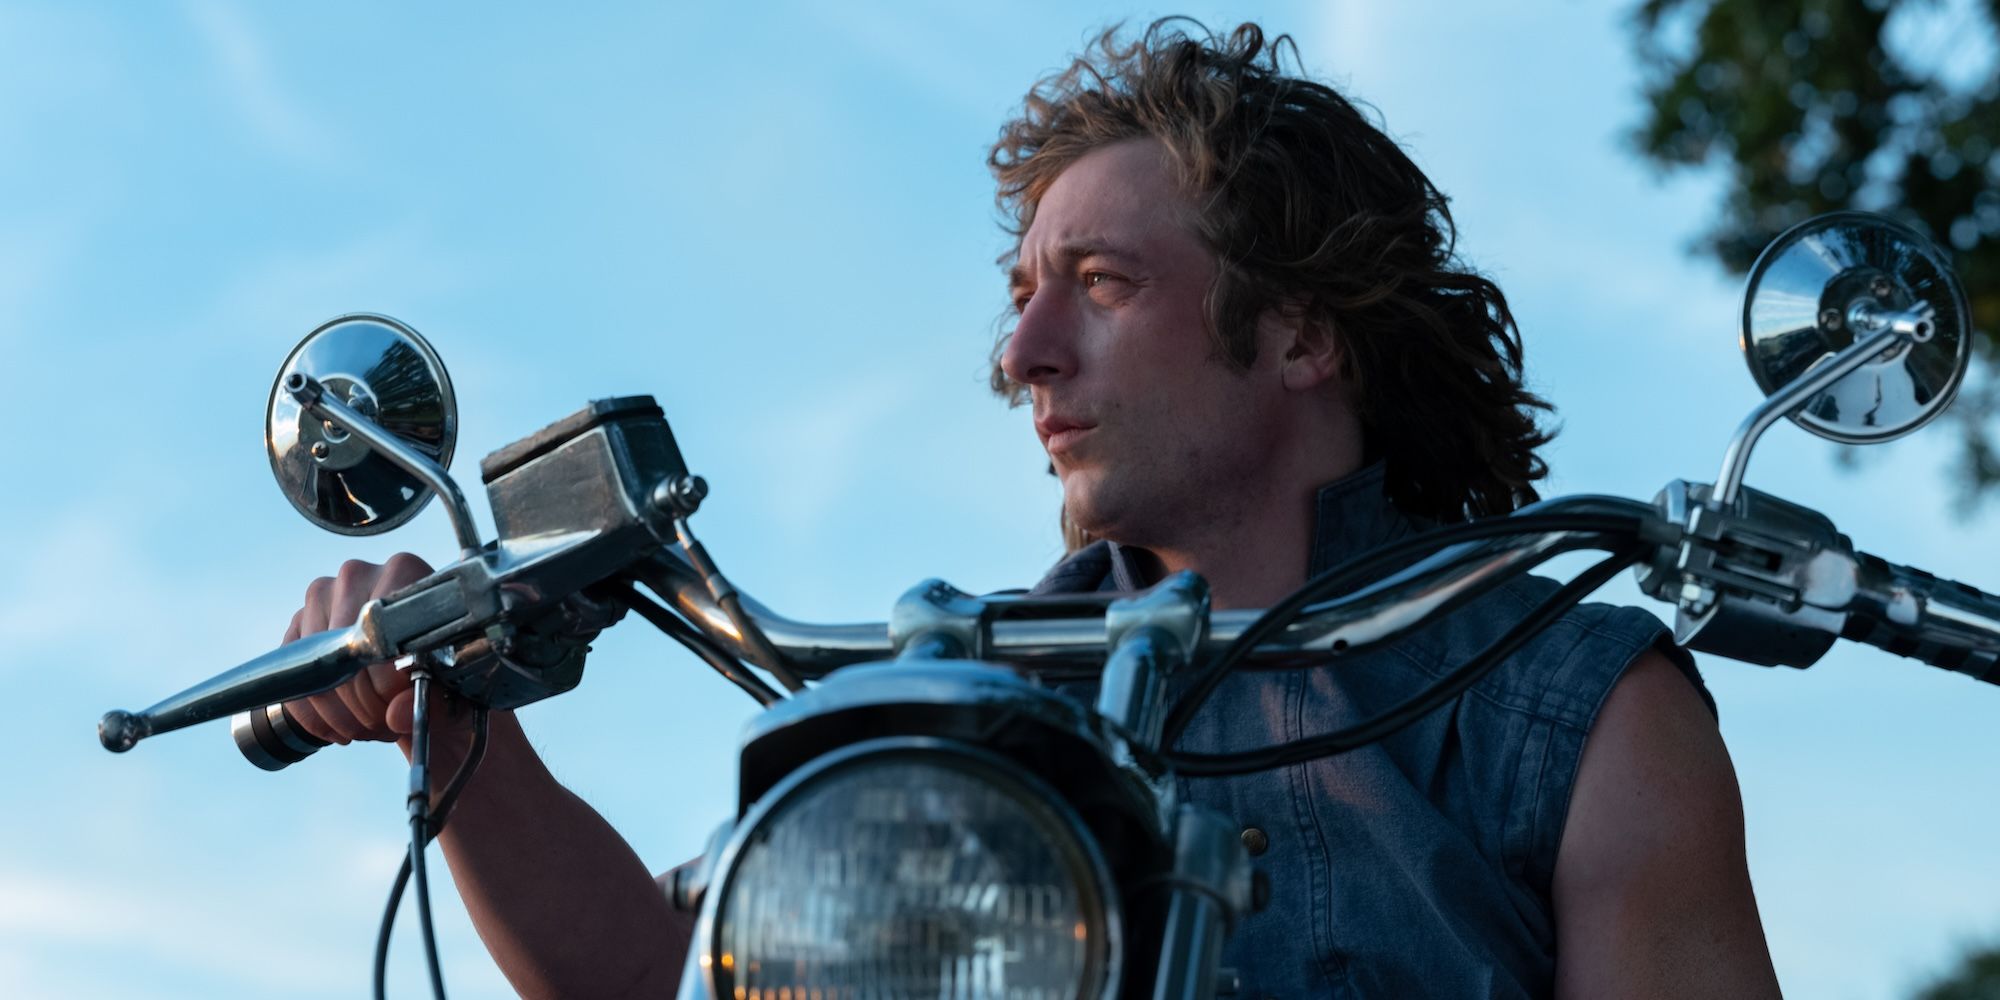 jeremy allen white in the iron claw